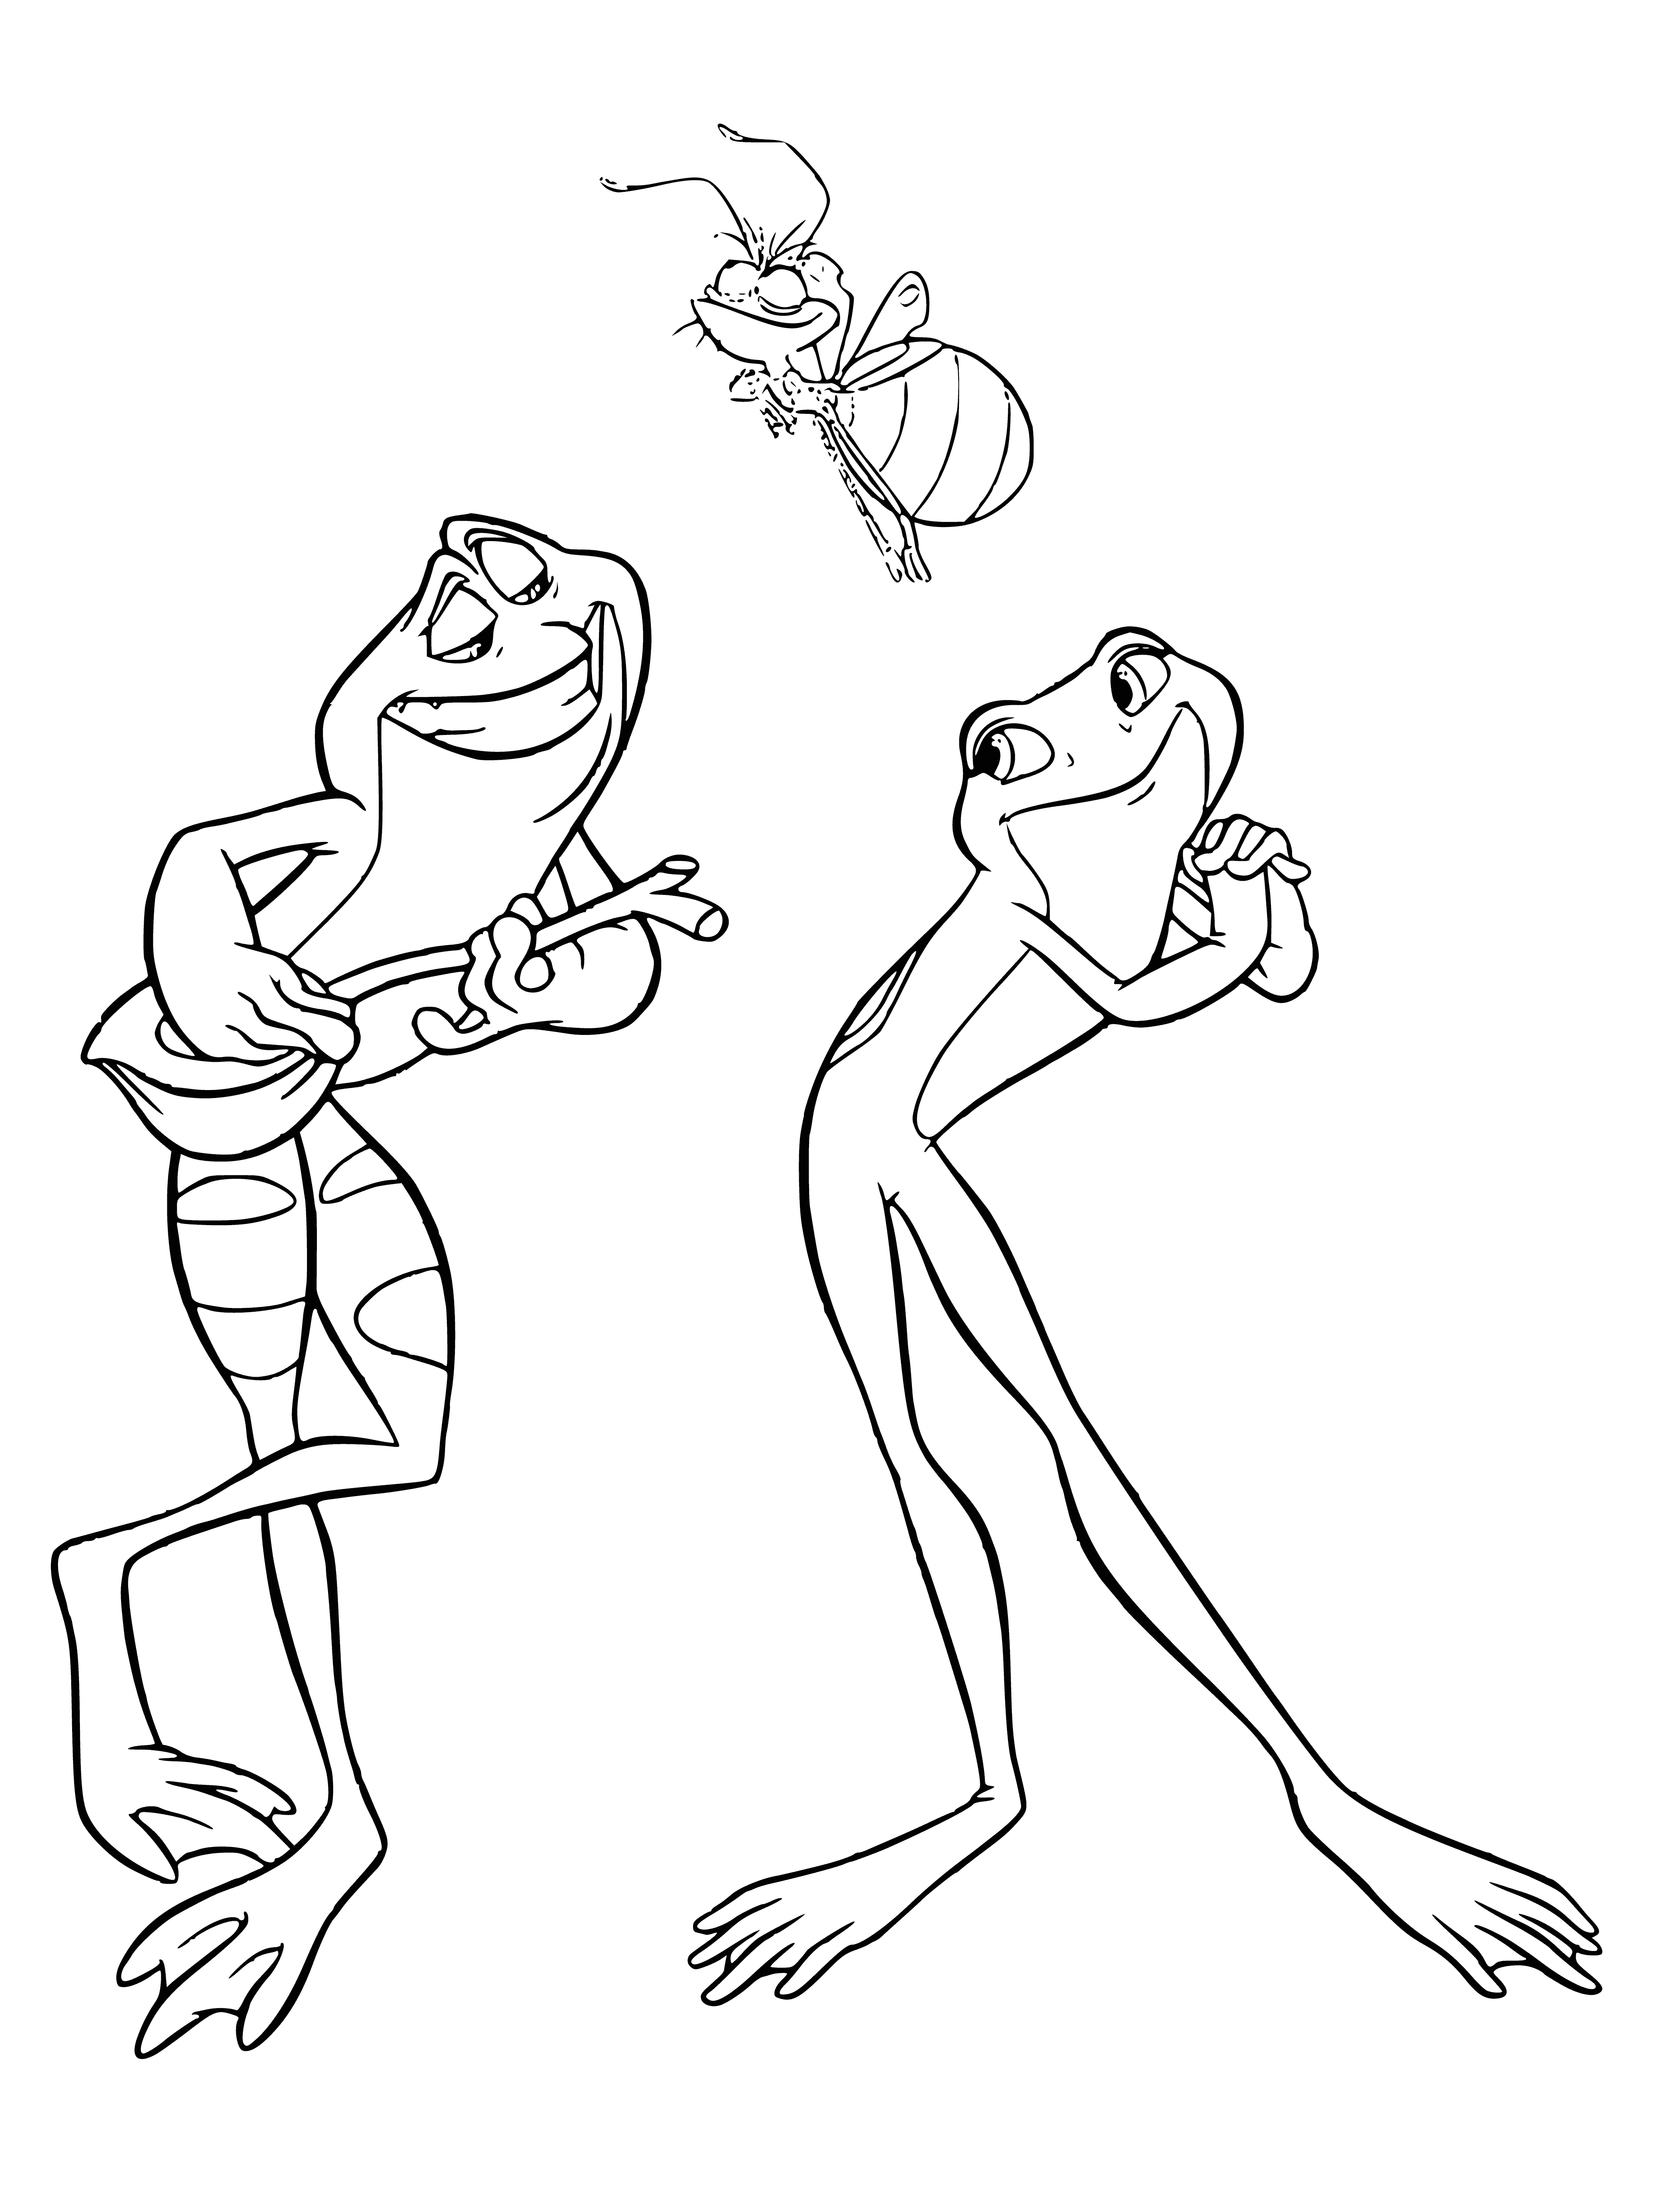 coloring page: A large green frog sings with fireflies around and lily pads beneath its feet.